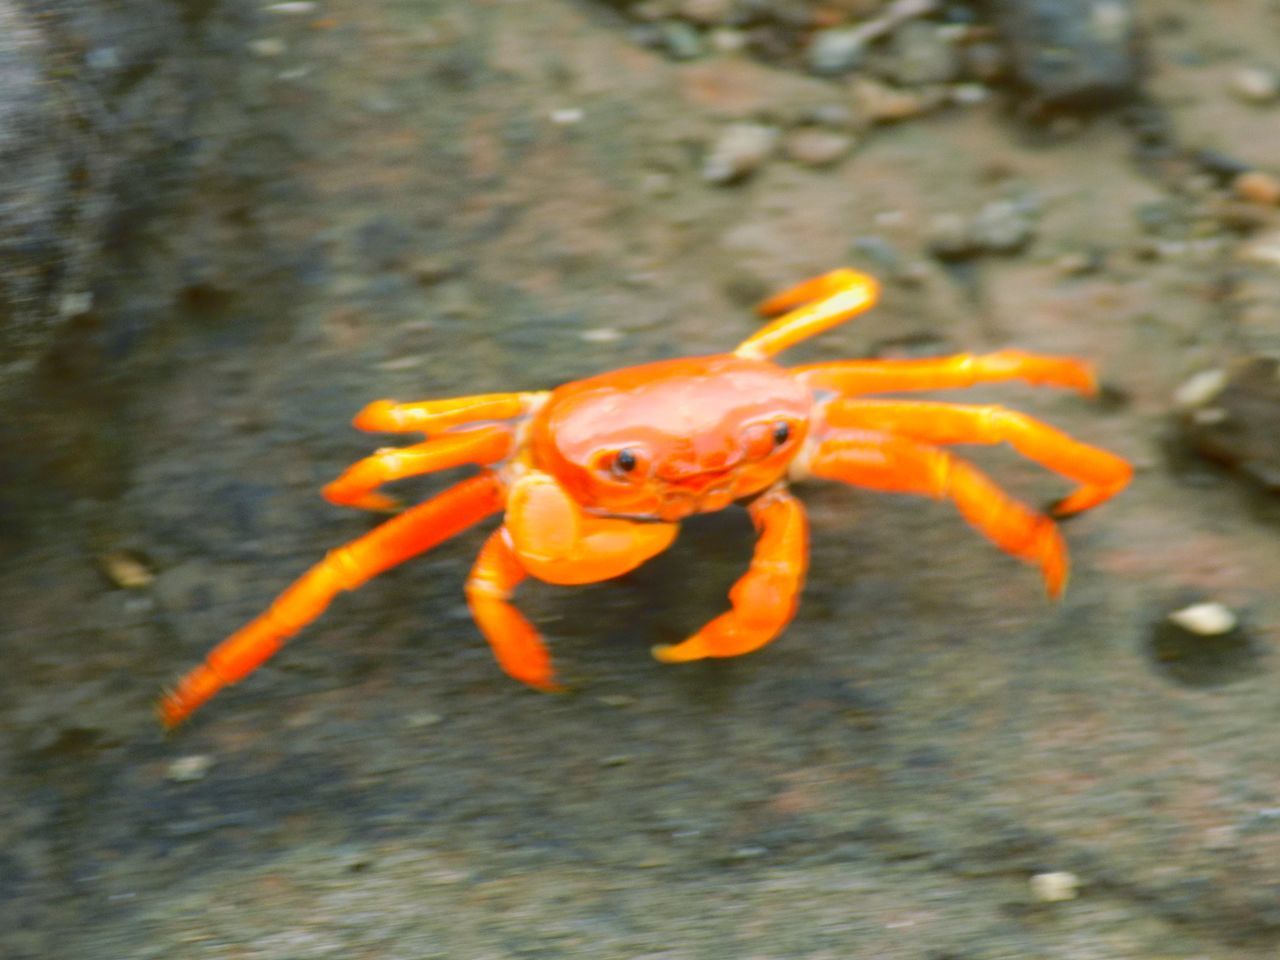 animal themes, animal wildlife, animal, wildlife, one animal, seafood, water, sea, food, marine, sea life, nature, no people, day, crab, macro photography, close-up, yellow, orange color, marine biology, outdoors, crustacean, full length, high angle view, underwater